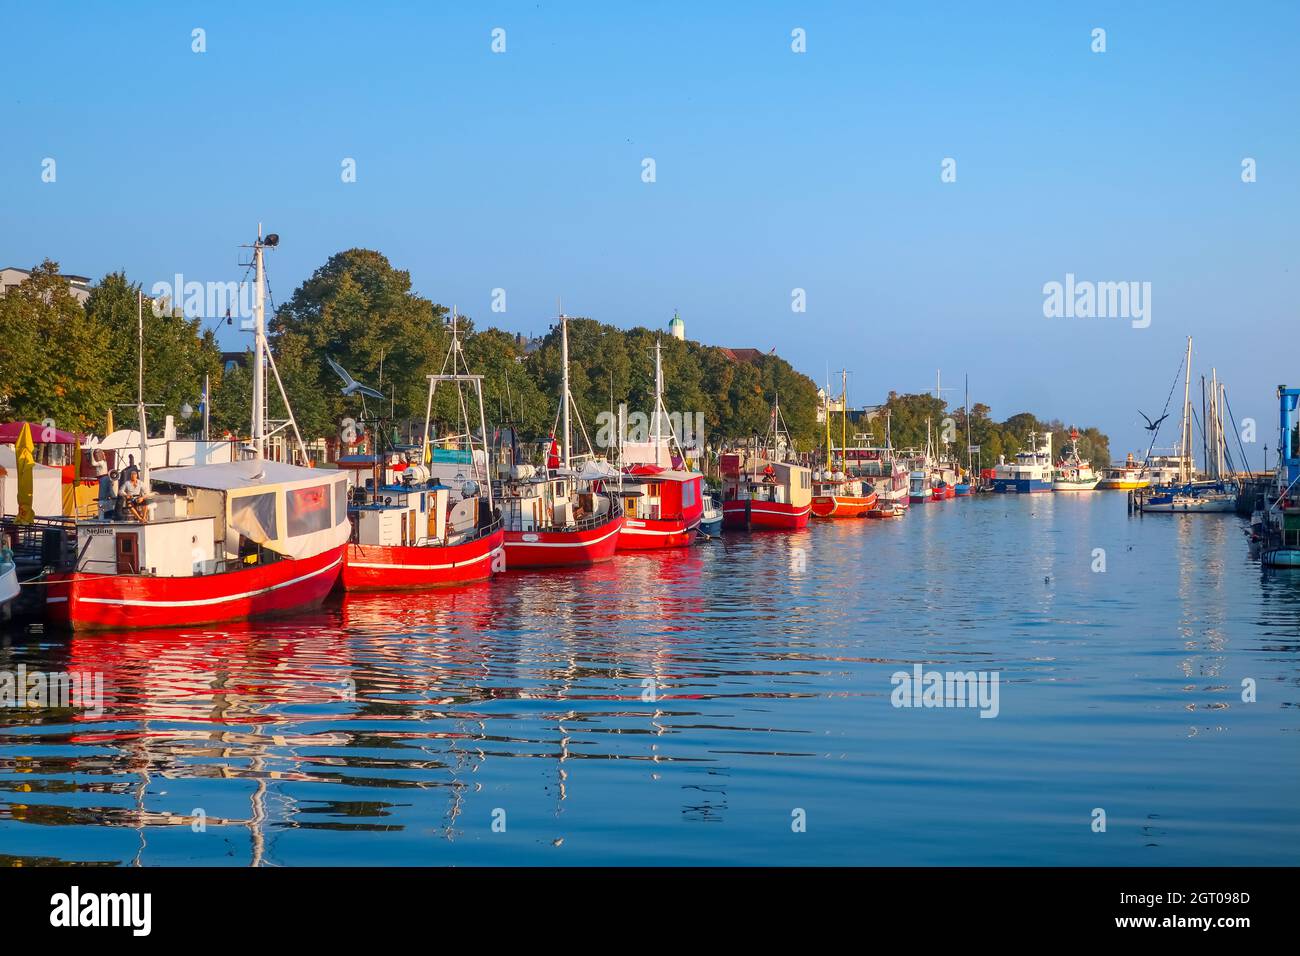 A line of red tourist and fishing boats line the Alter Strom Canal in the coastal resort of Warnemunde on the Baltic Sea. Stock Photo